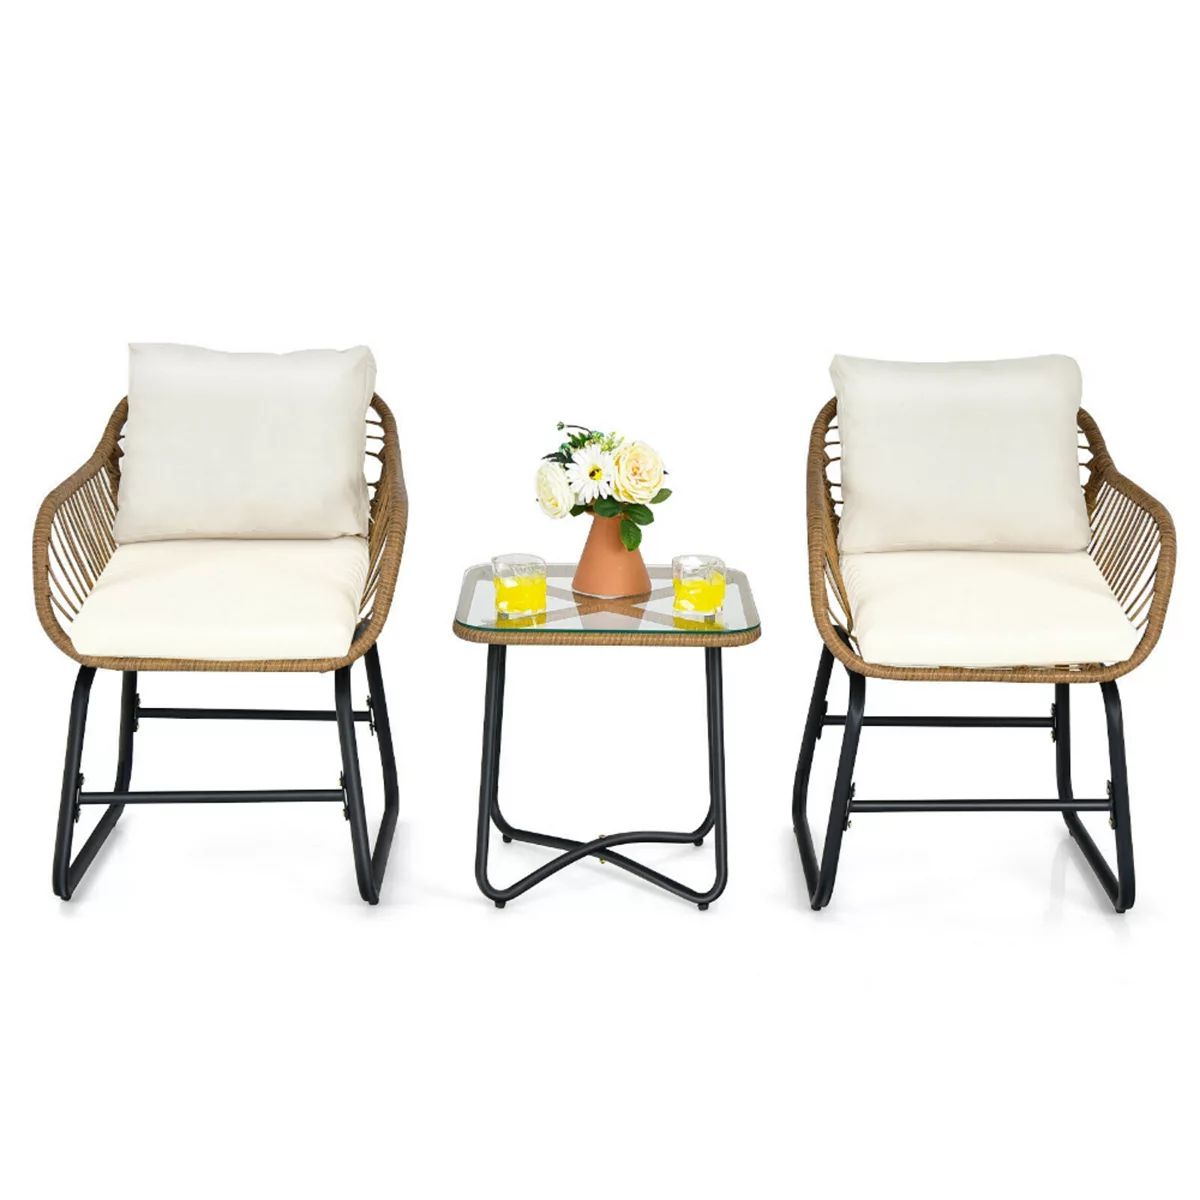 3-Piece Patio Bistro Set with 2 Rattan Chairs and Square Glass Coffee Table-White | Kohl's